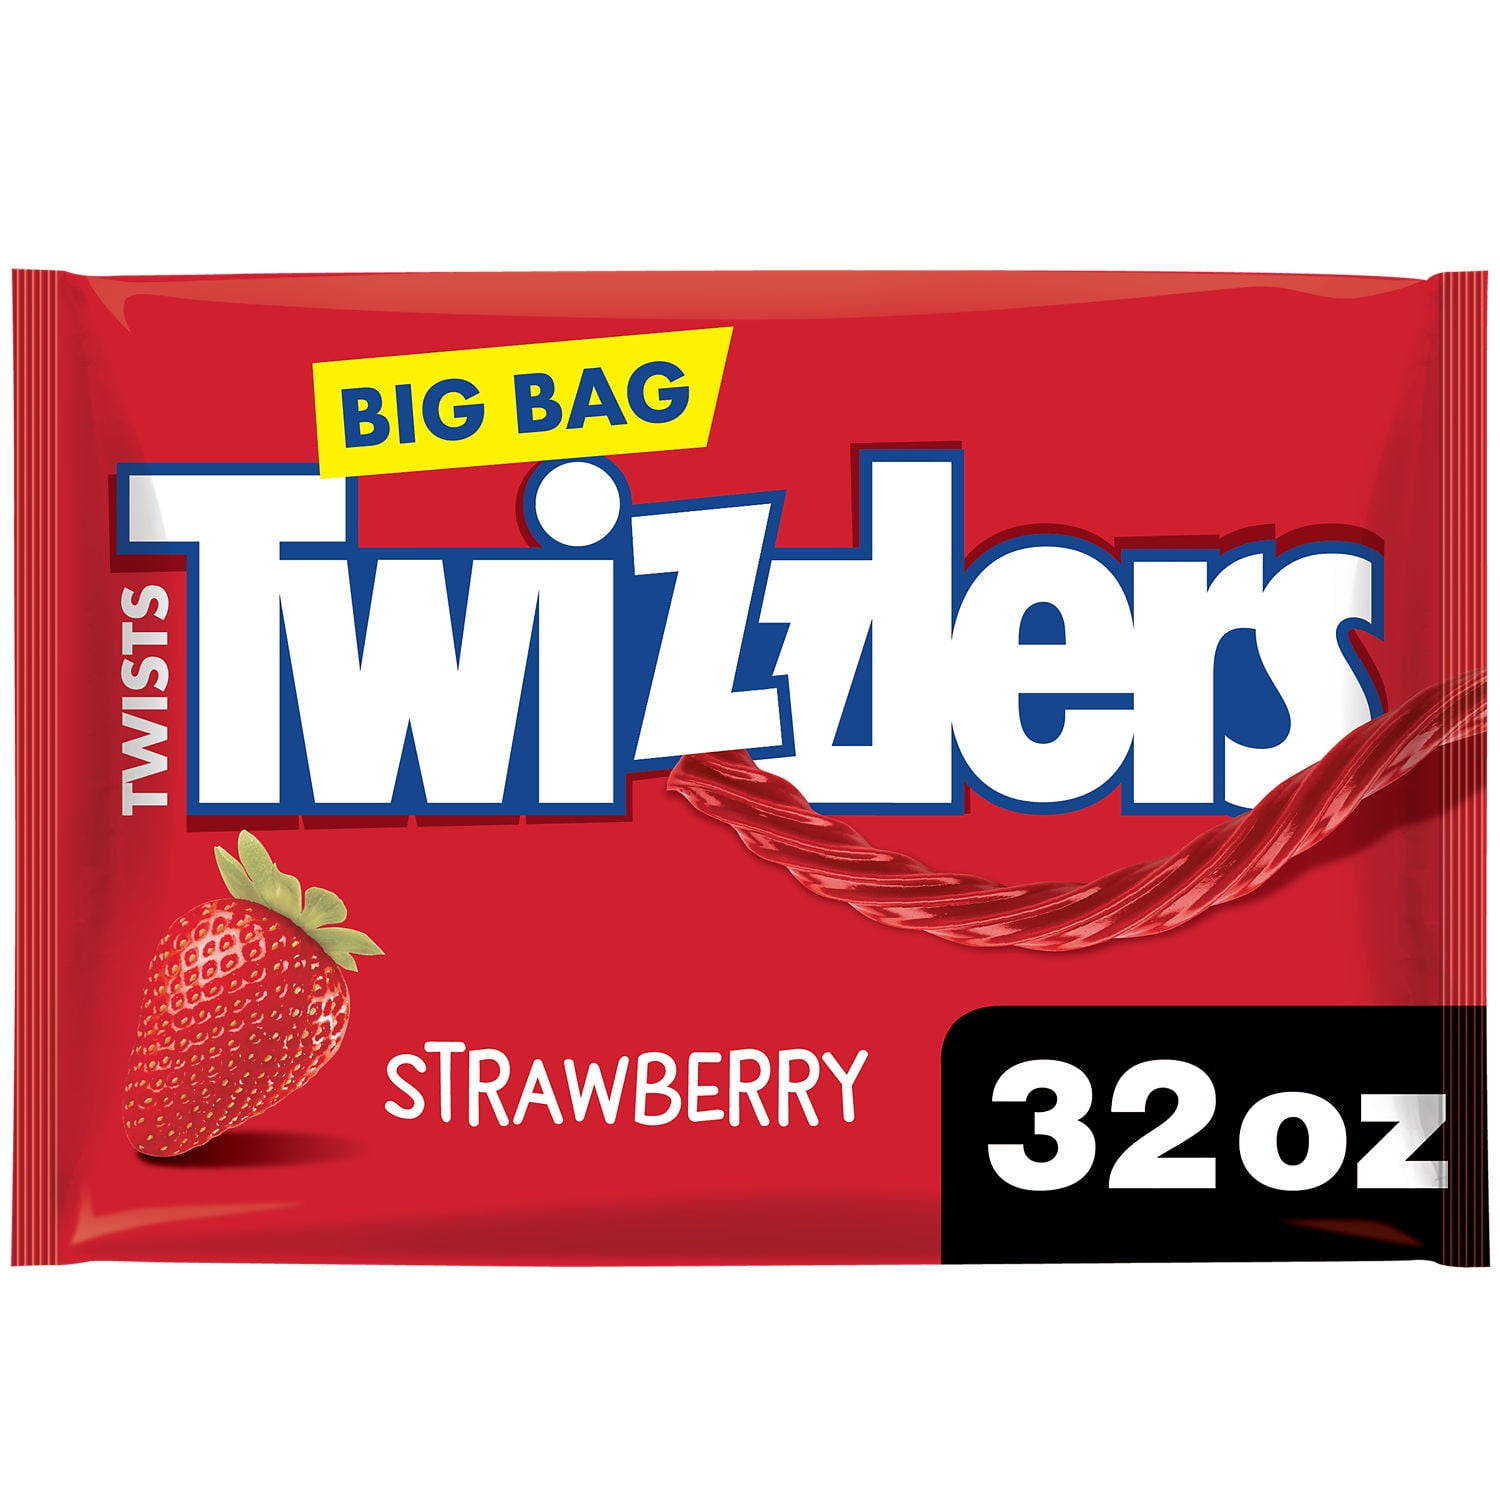 Twizzlers Twists Strawberry Flavored Licorice Style Low Fat Candy, Big Bag  32 oz